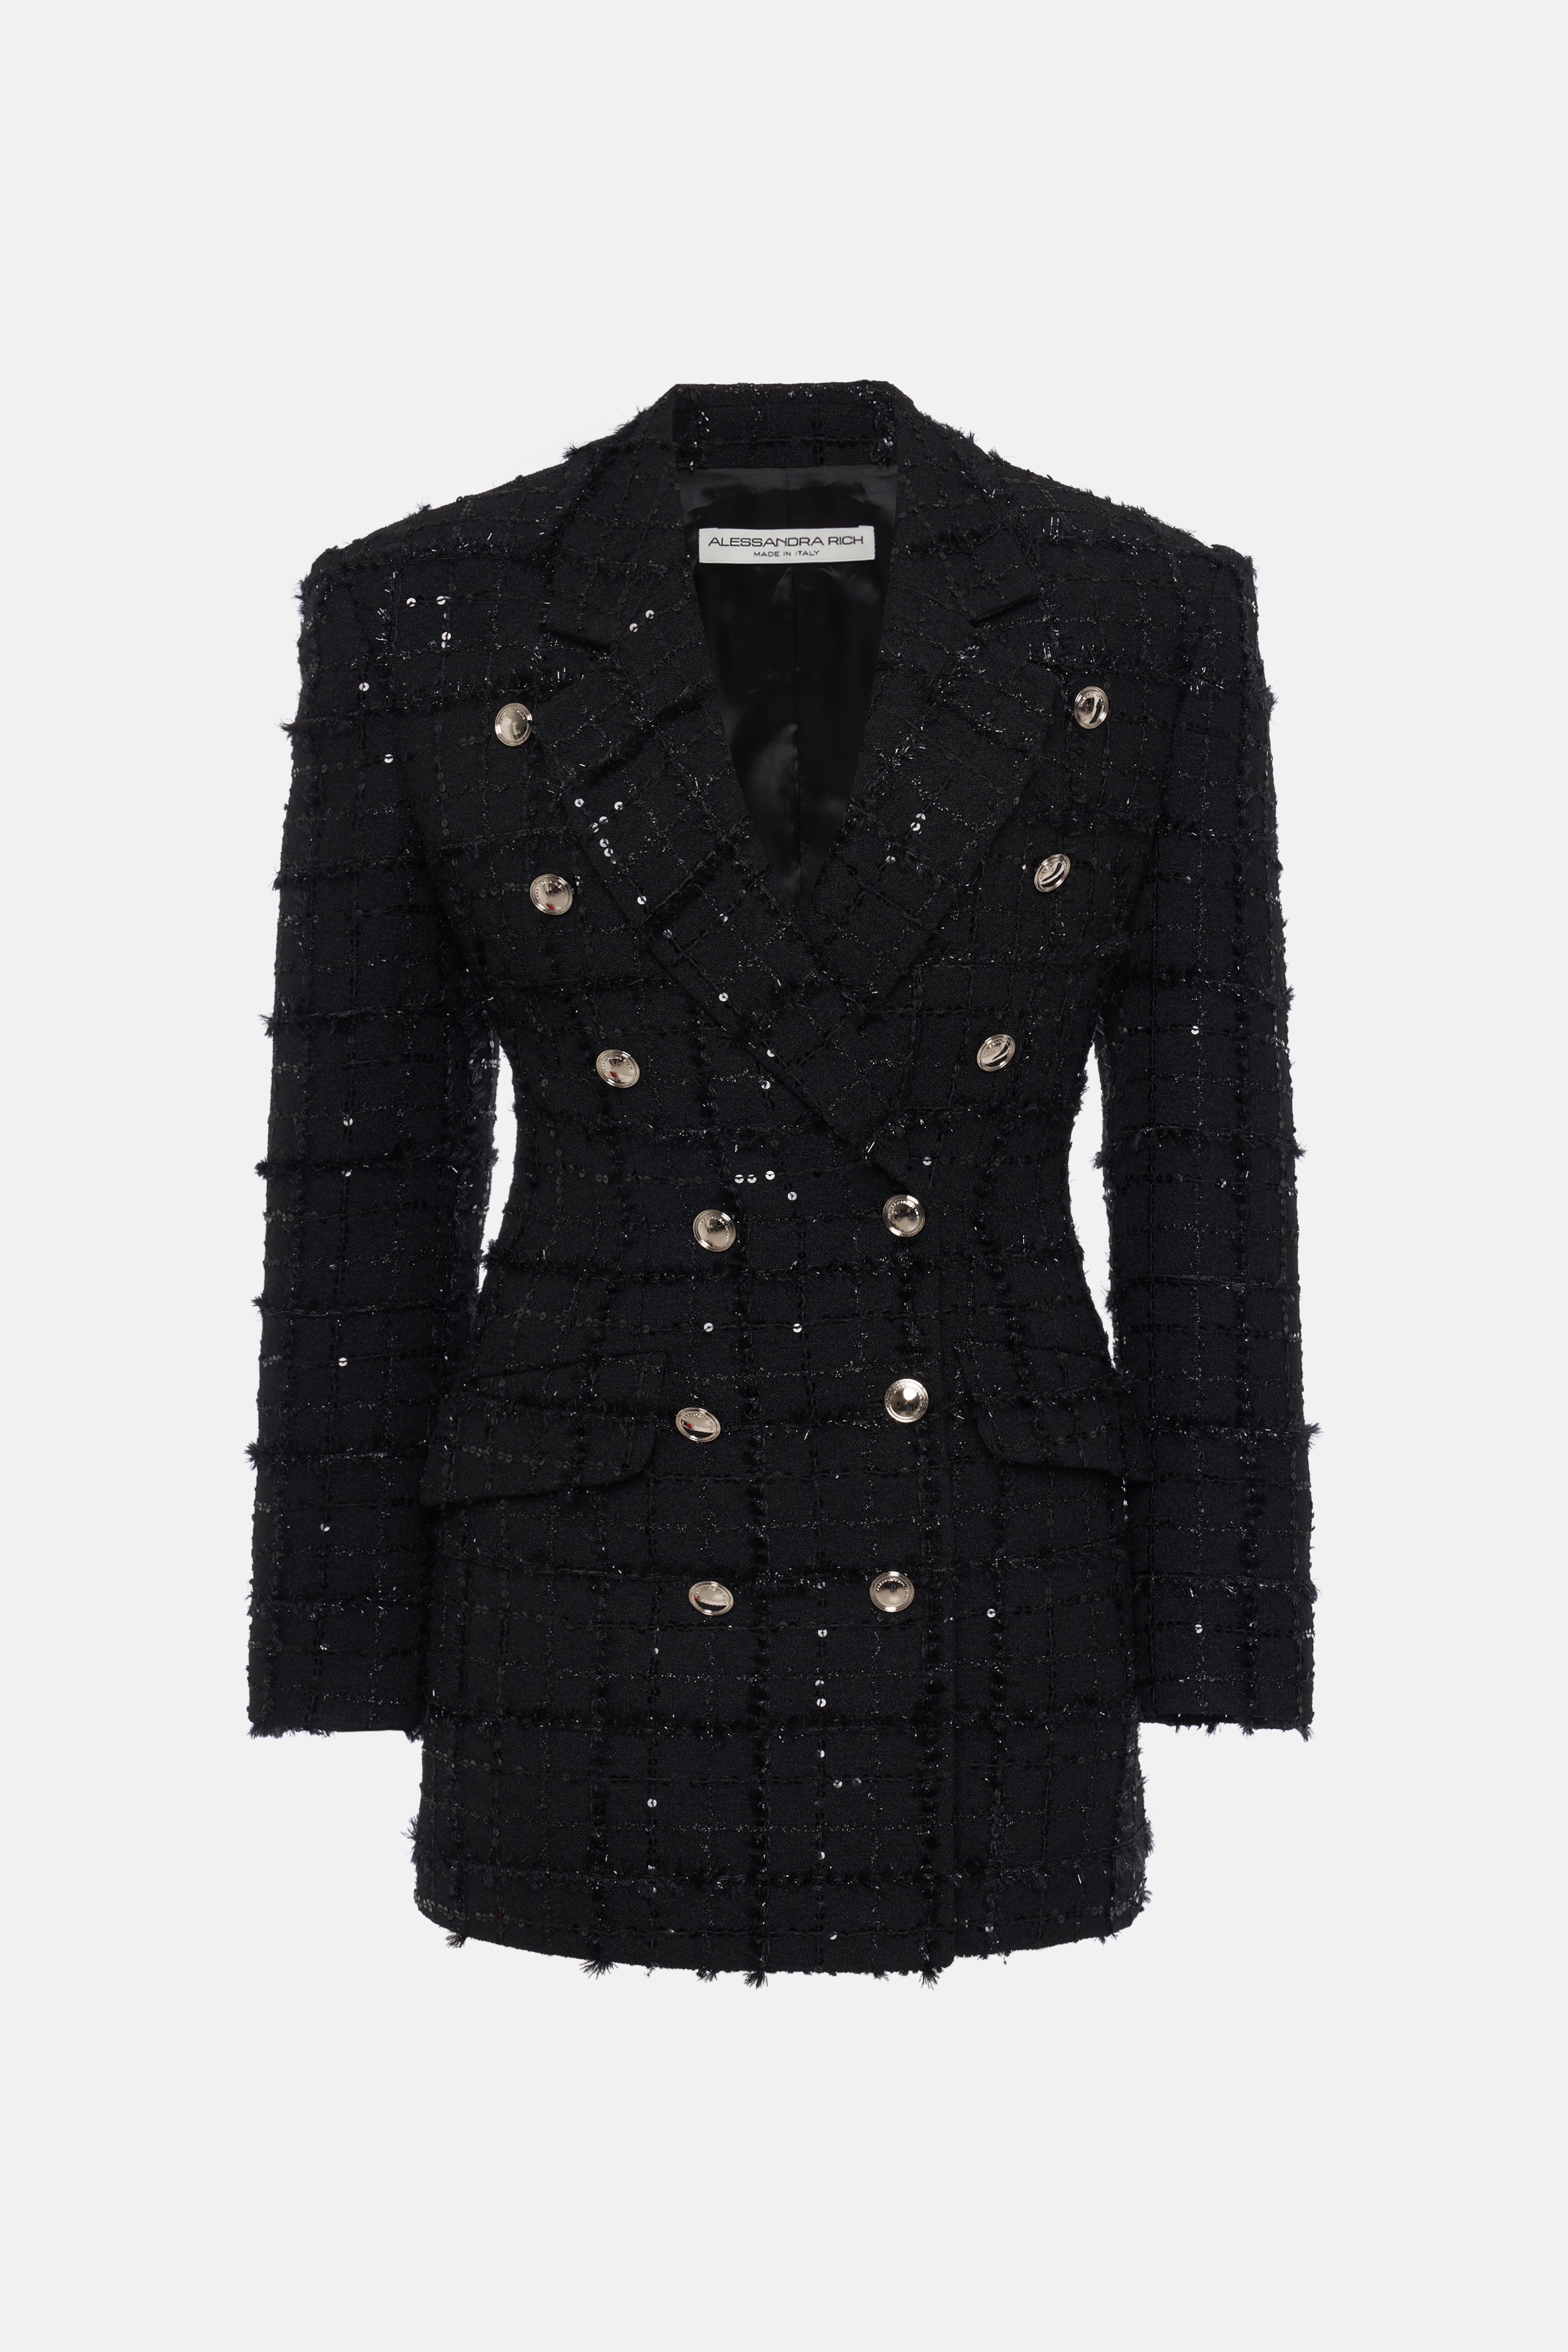 SEQUIN CHECKED TWEED DOUBLE BREASTED JACKET